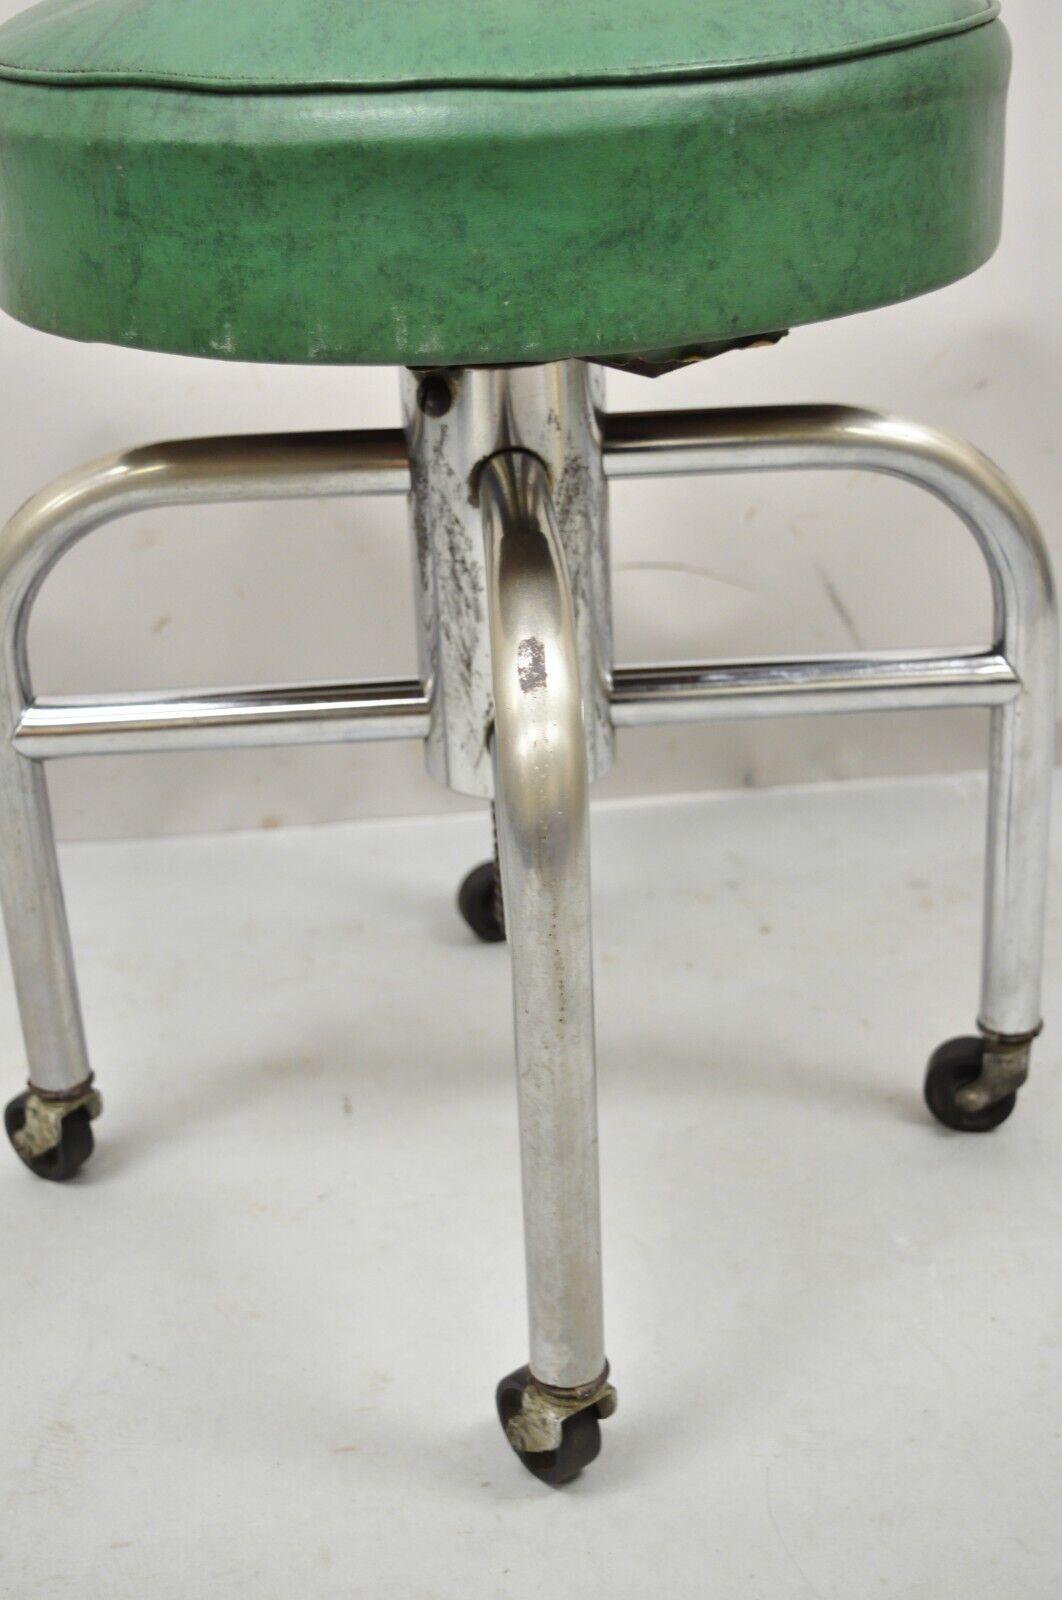 Antique American Industrial Metal Green Vinyl Rolling Work Stool Seat In Good Condition For Sale In Philadelphia, PA